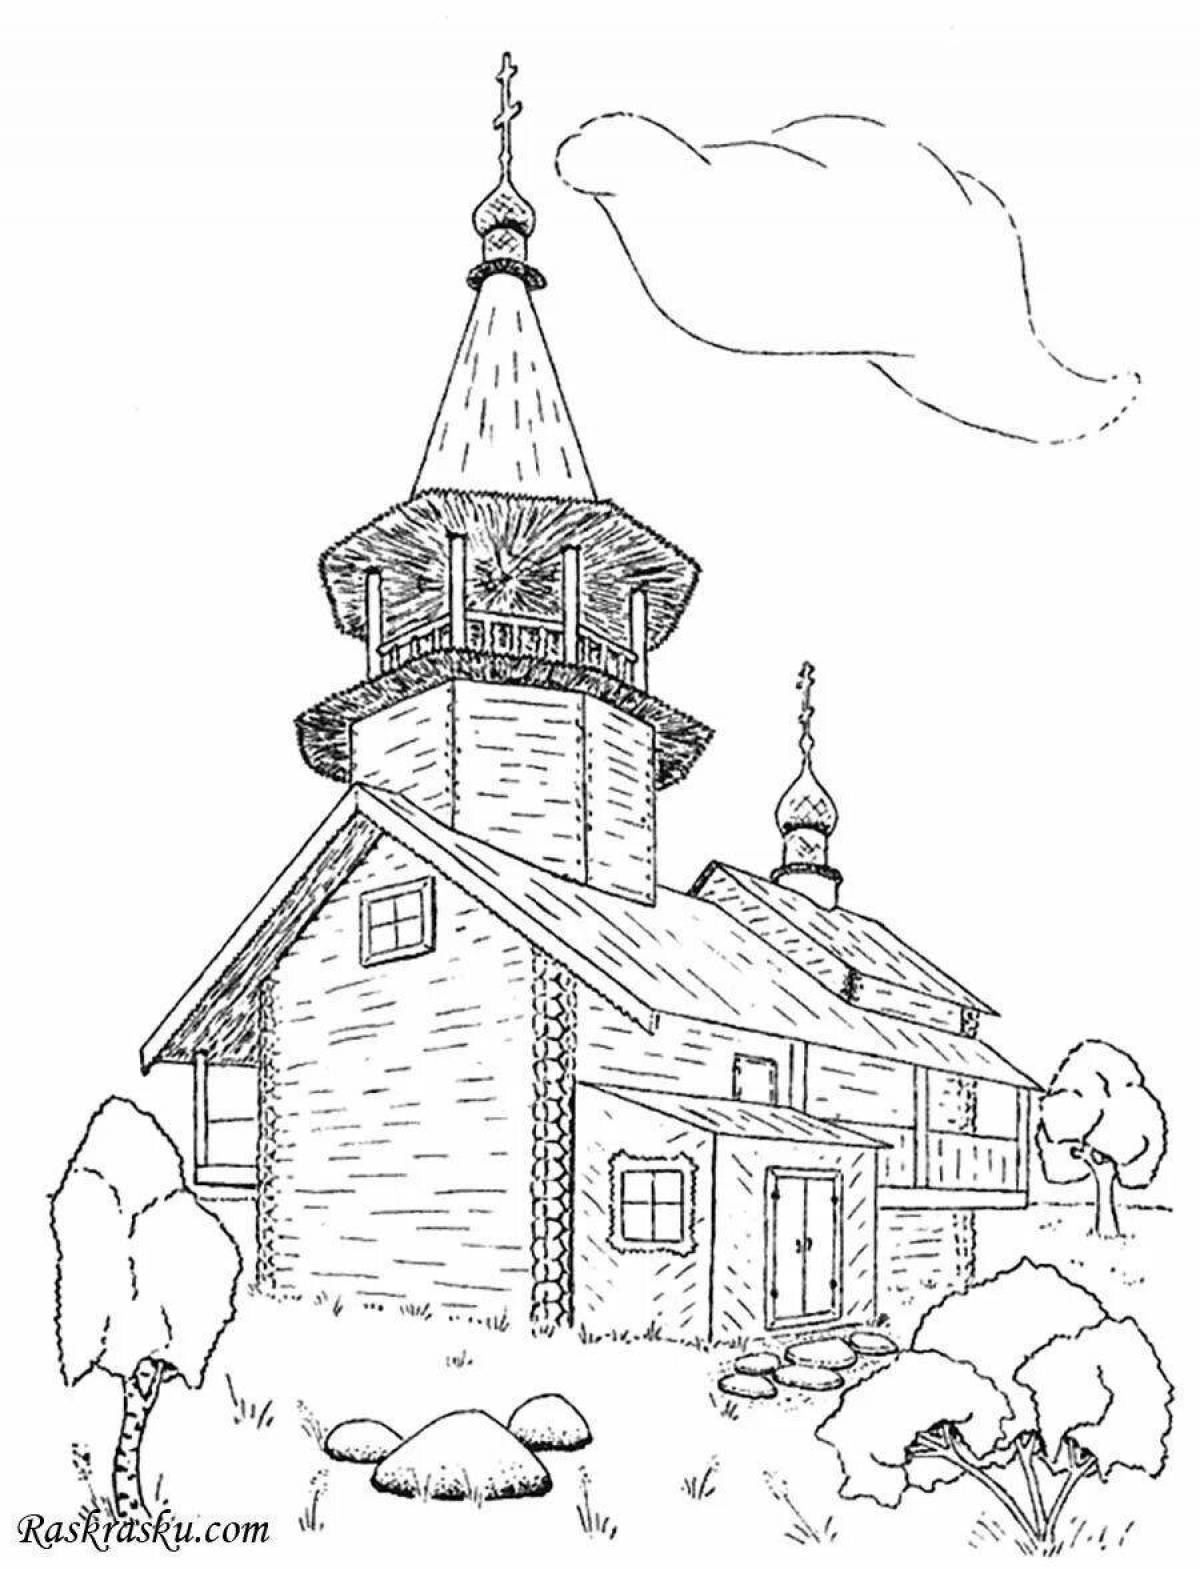 Charming wooden architecture coloring book